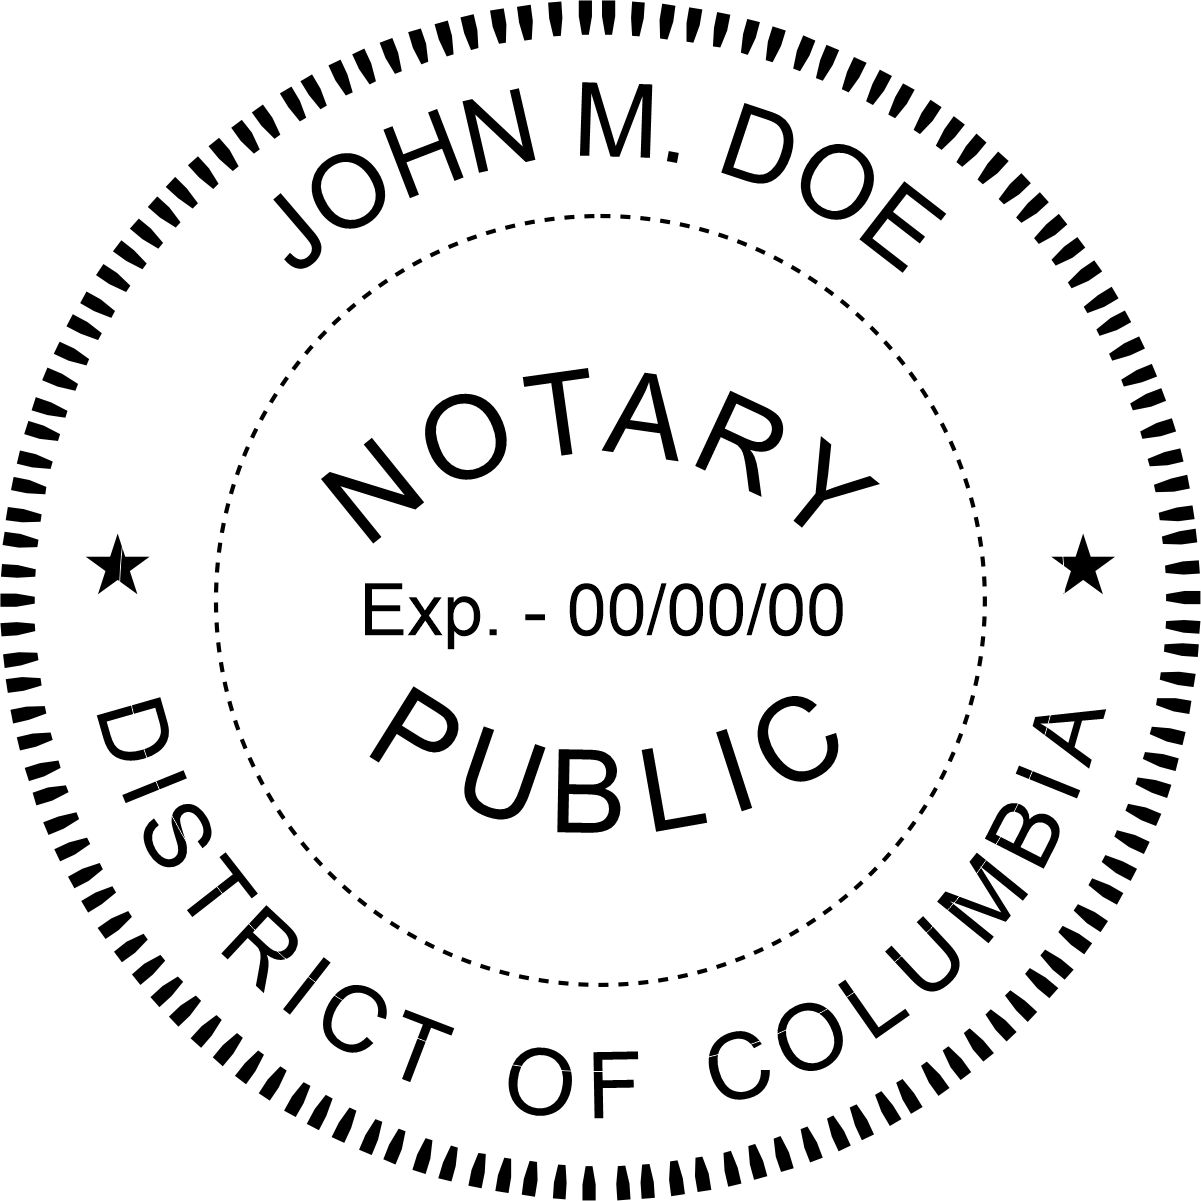 district of columbia pocket notary seal